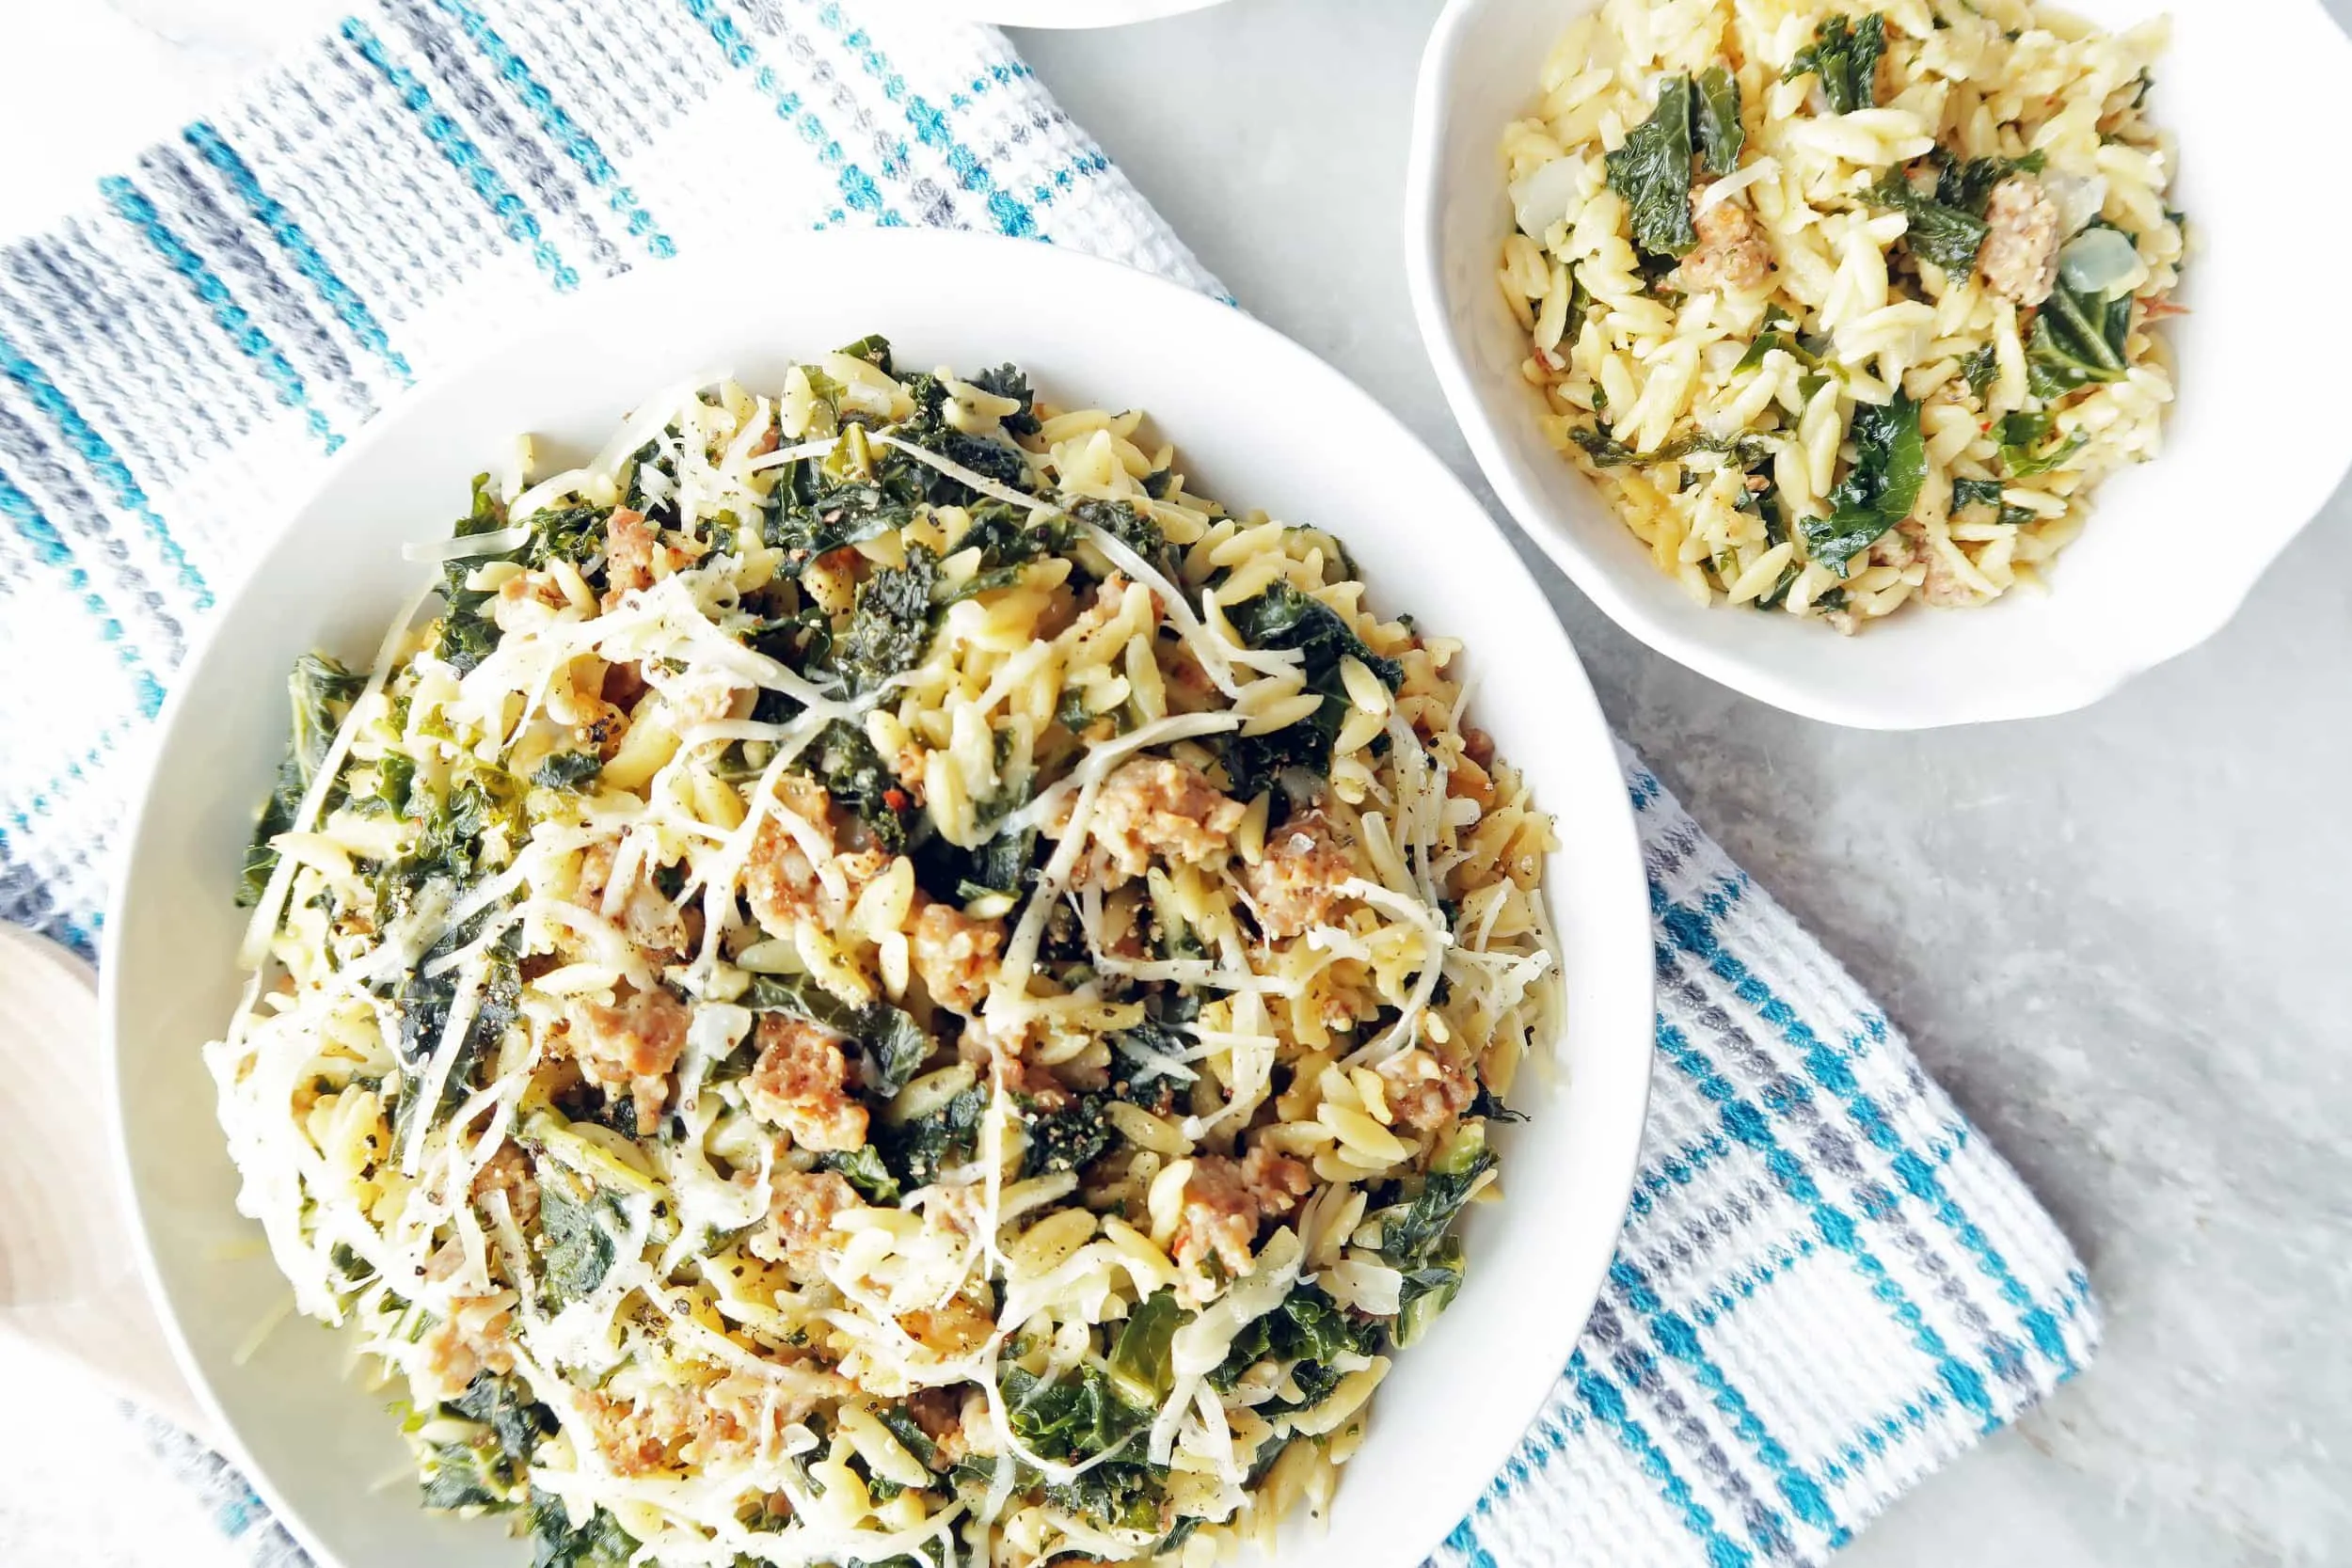 Orzo pasta with Italian sausage and kale in a large pasta bowl and in a small bowl.